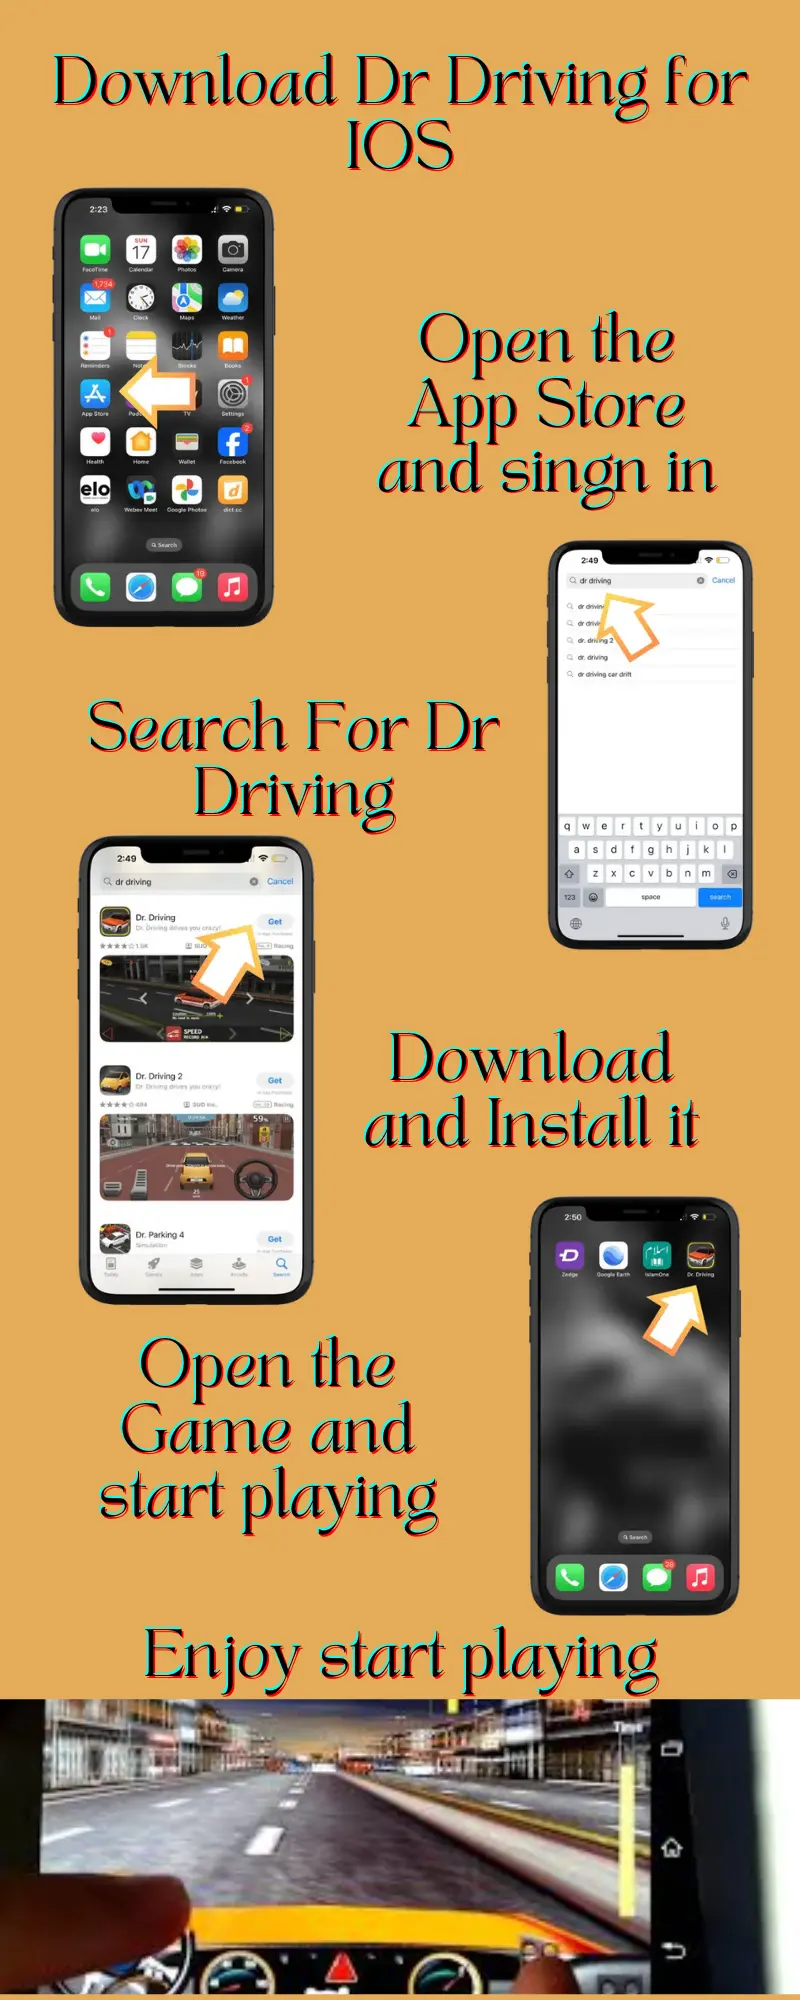 Dr. Driving for iOS/iPhone guidlines